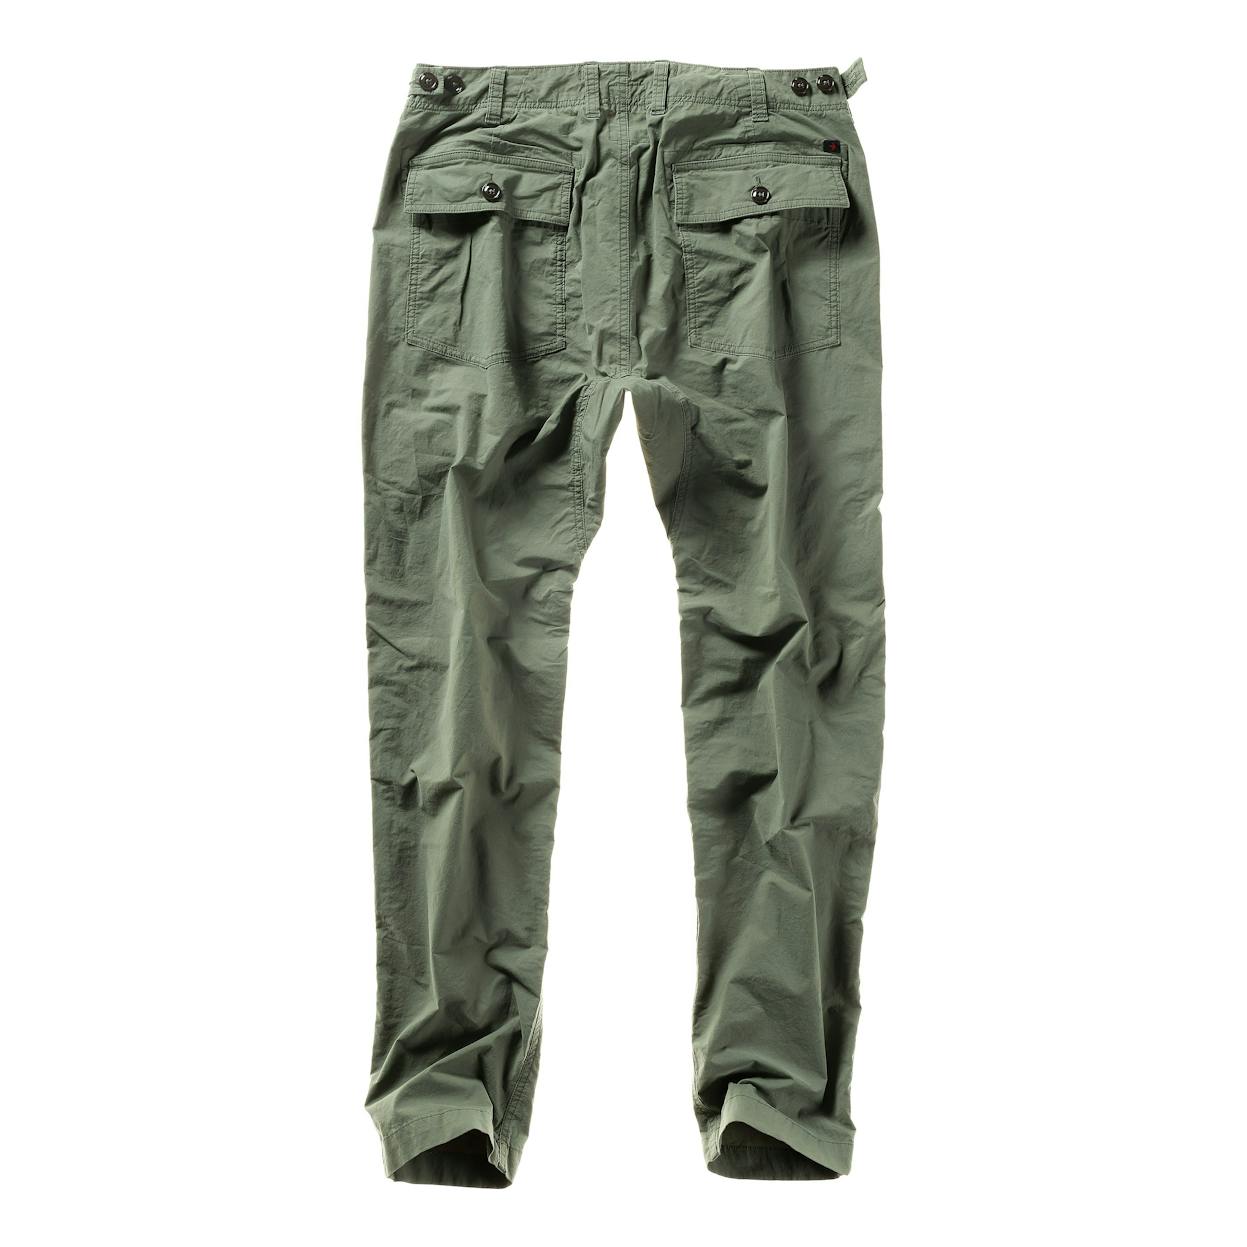 Relwen Tropic Supply Pant - Military Olive | Casual Pants | Huckberry